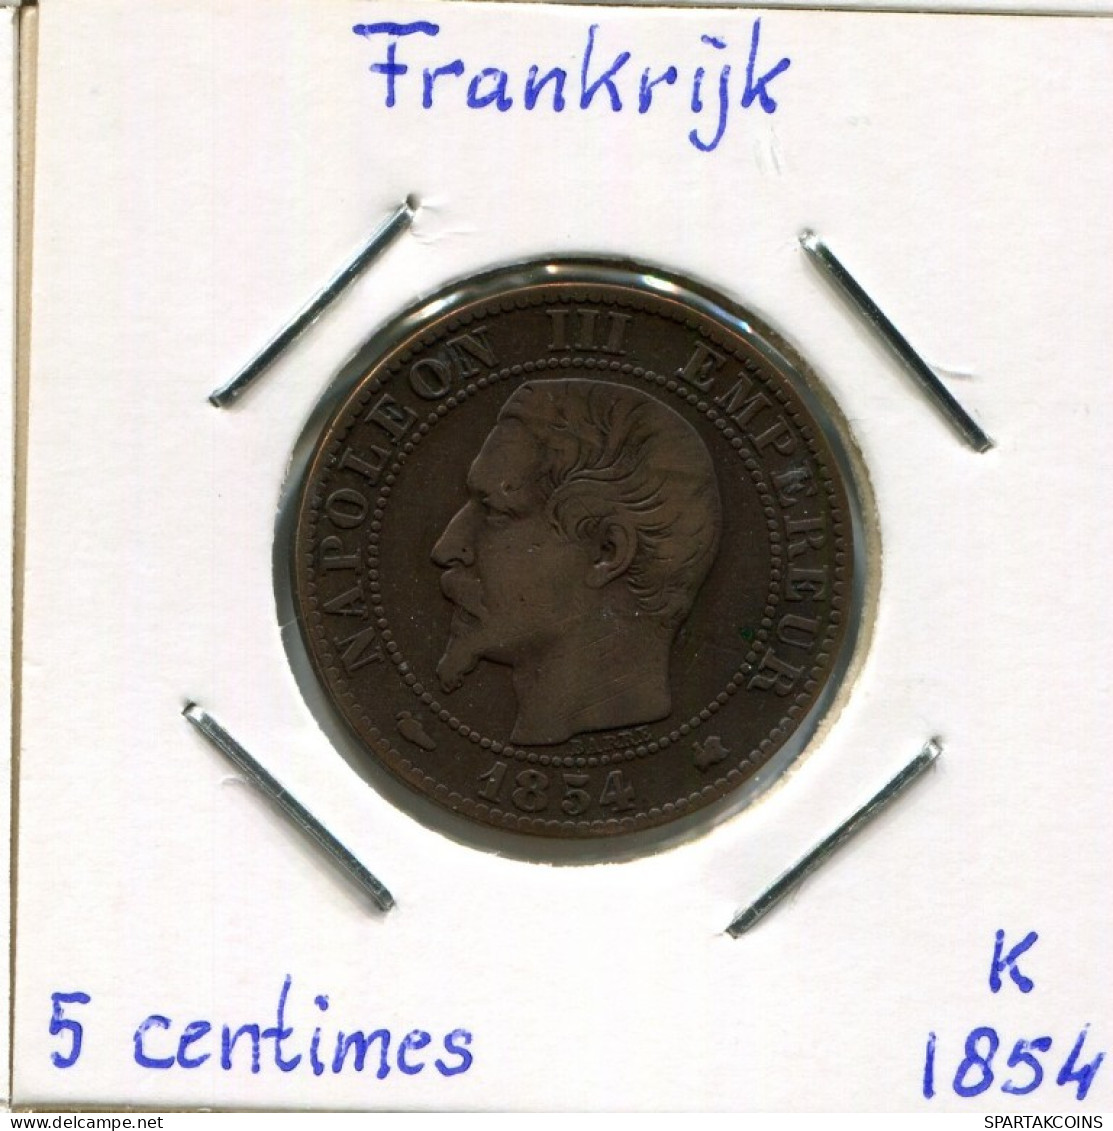 2 CENTIMES 1854 M FRANCE Coin Napoleon III Imperator #AK988.U.A - 2 Centimes